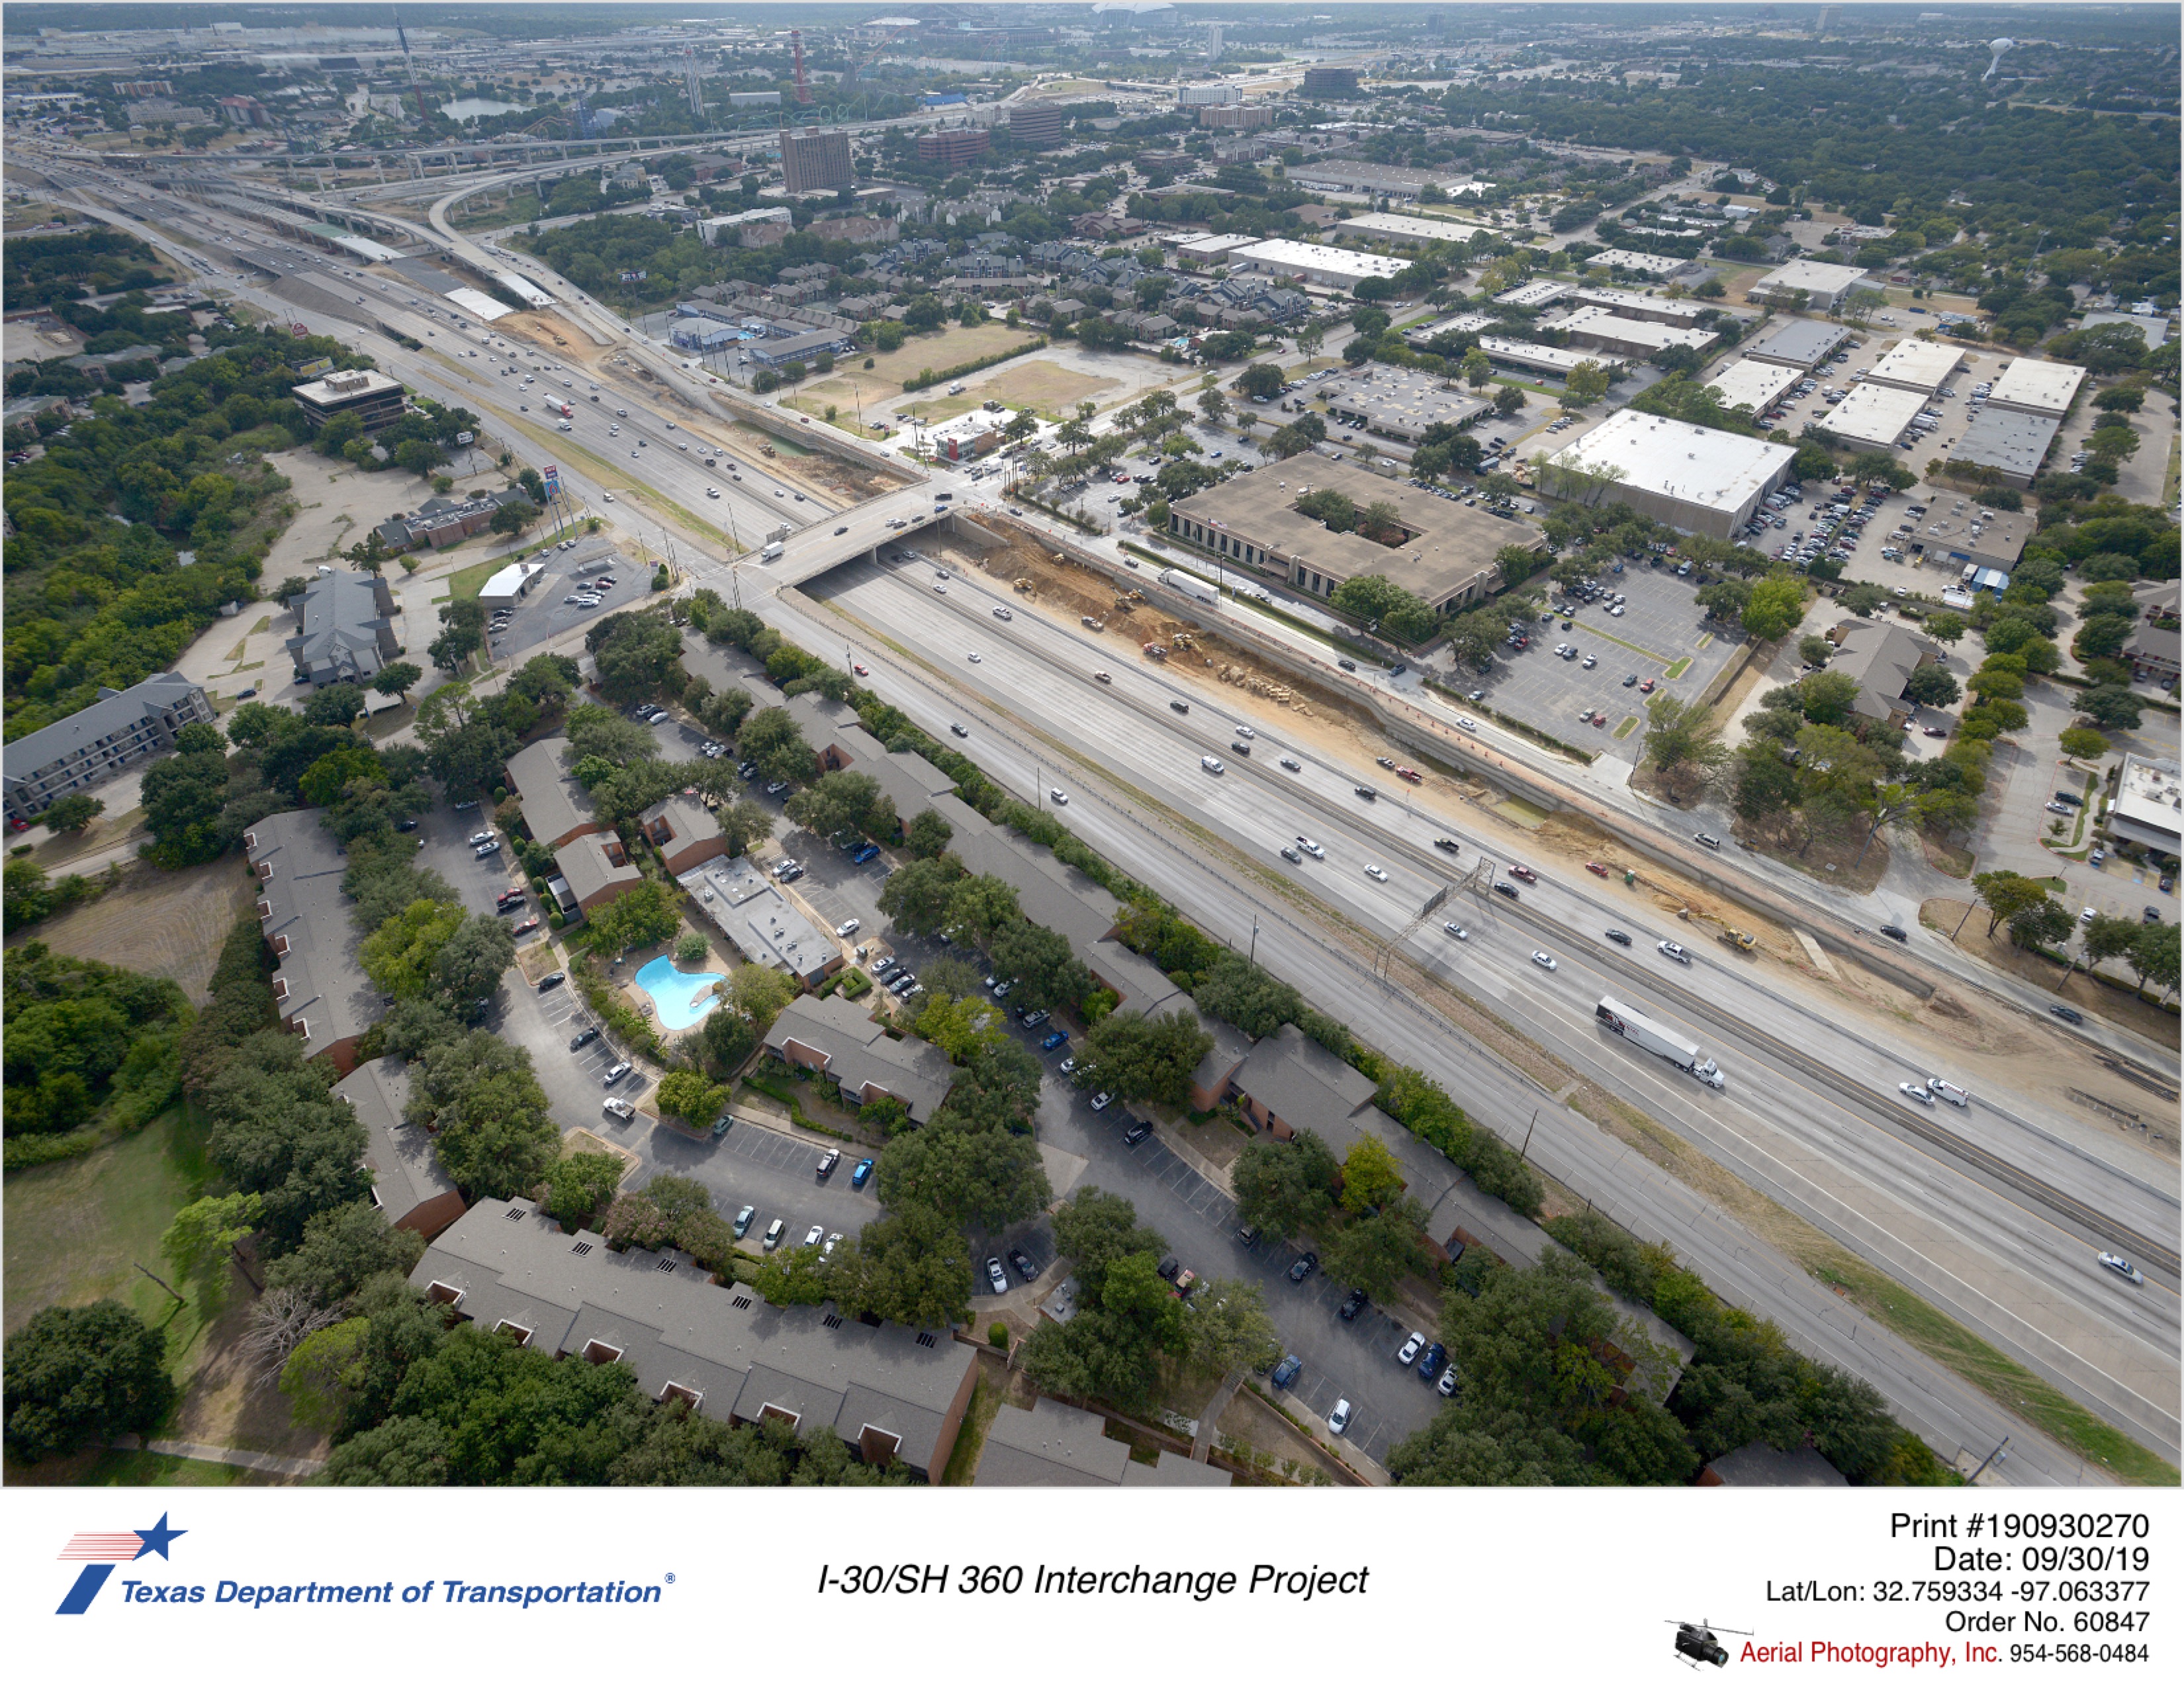 SH 360 looking at Ave J in southwest direction. Construction of southbound frontage road retaining walls north and south of Ave J.